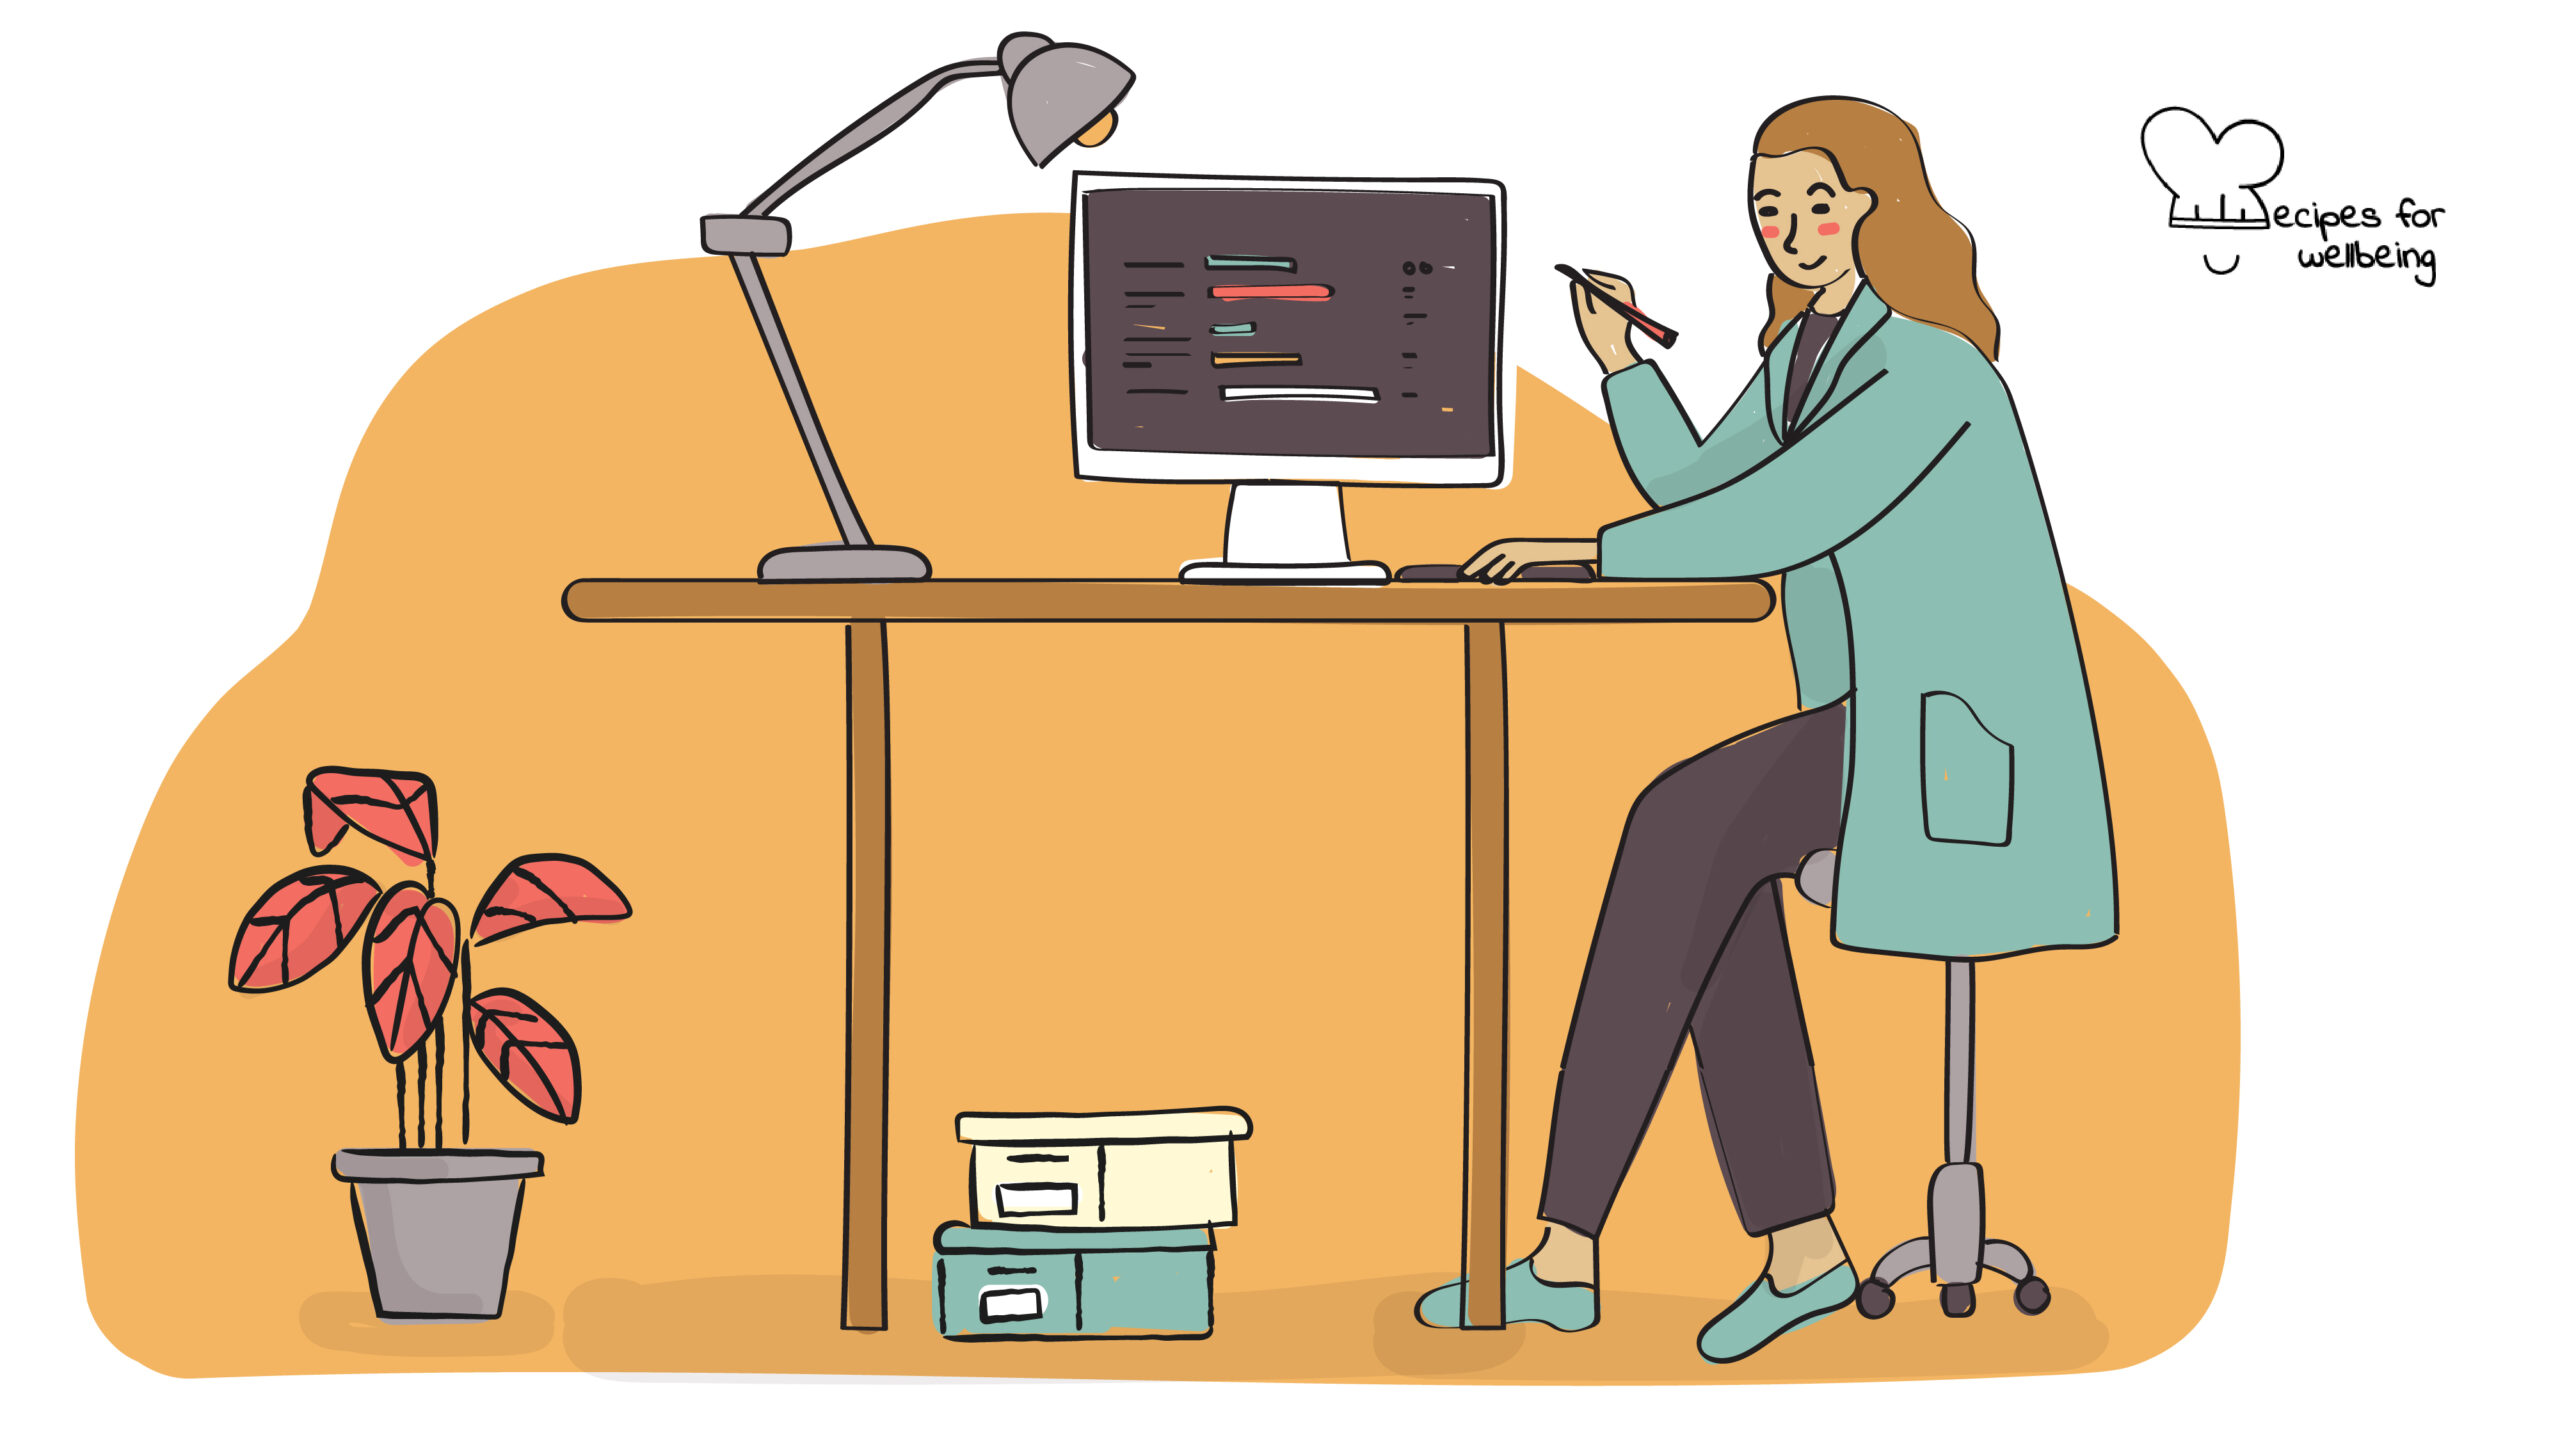 Illustration of a person sitting at a desk and working in front of a computer. © Recipes for Wellbeing